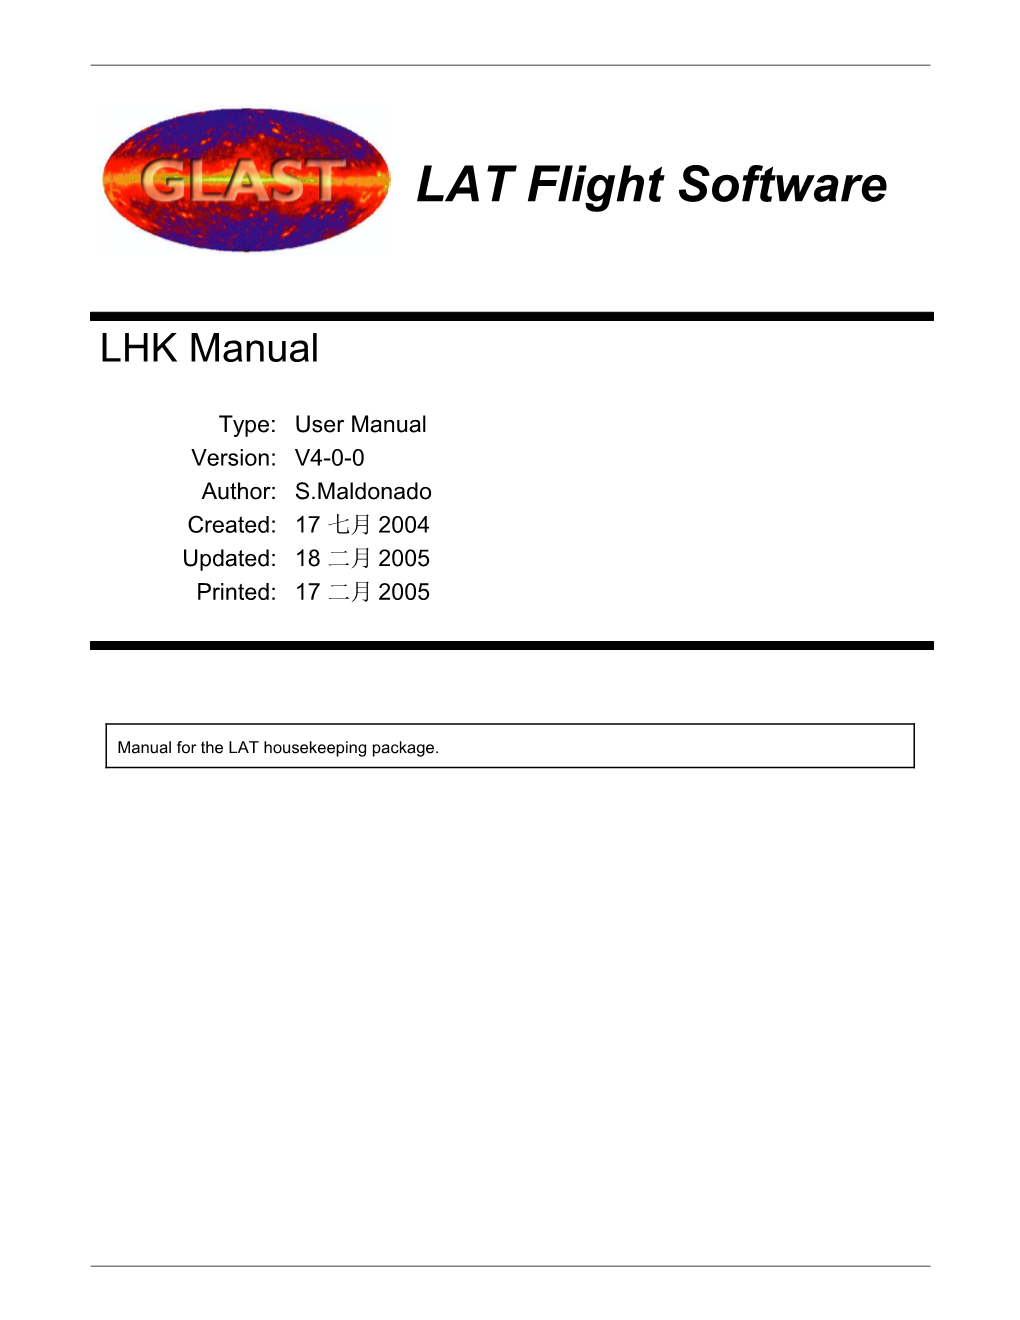 Manual for the LAT Housekeeping Package